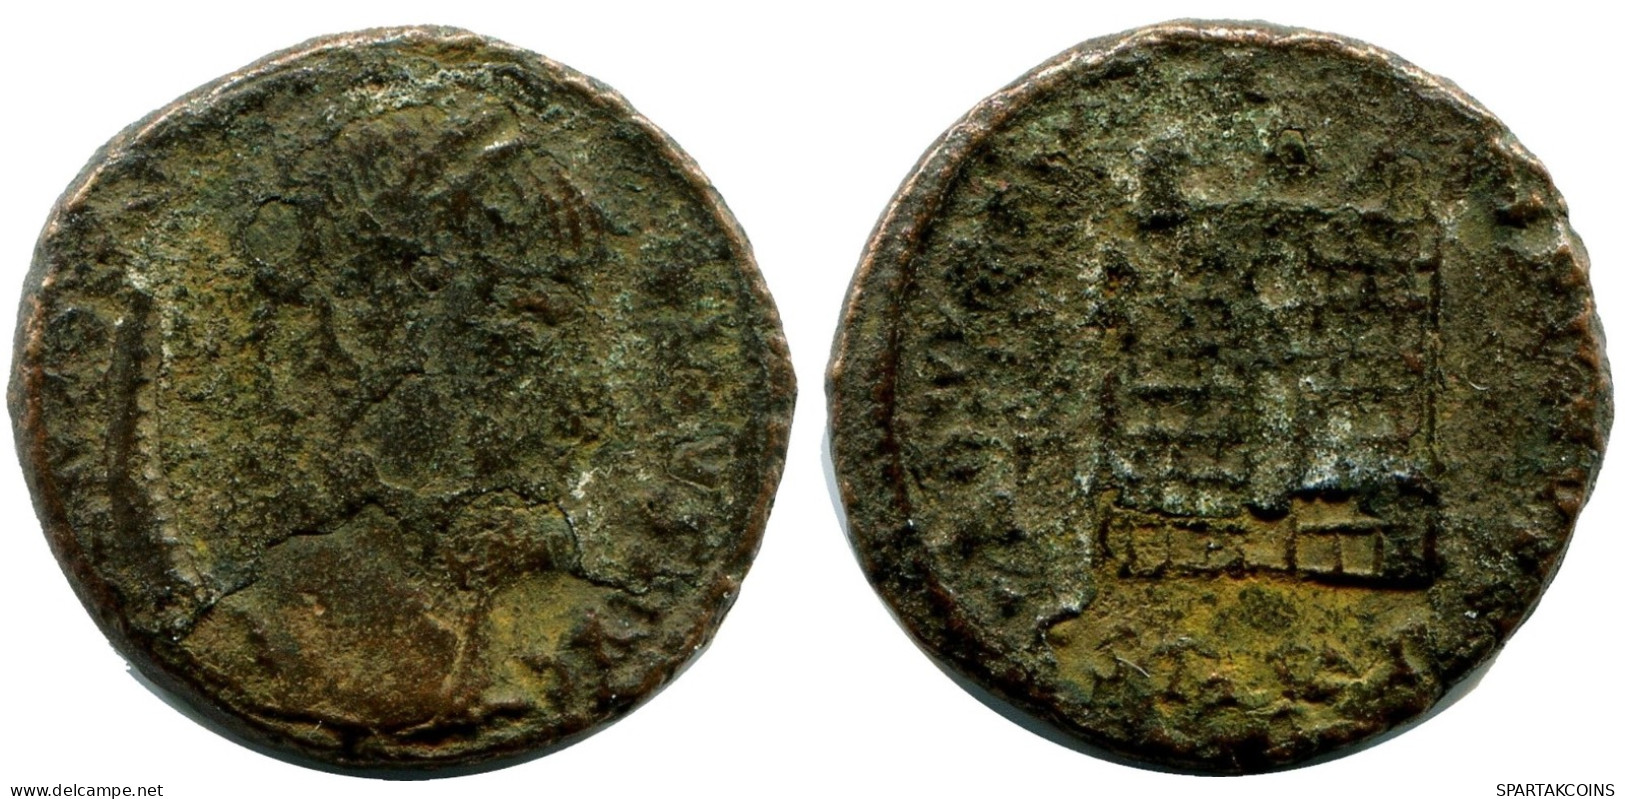 CONSTANTINE I MINTED IN CYZICUS FROM THE ROYAL ONTARIO MUSEUM #ANC11040.14.F.A - L'Empire Chrétien (307 à 363)